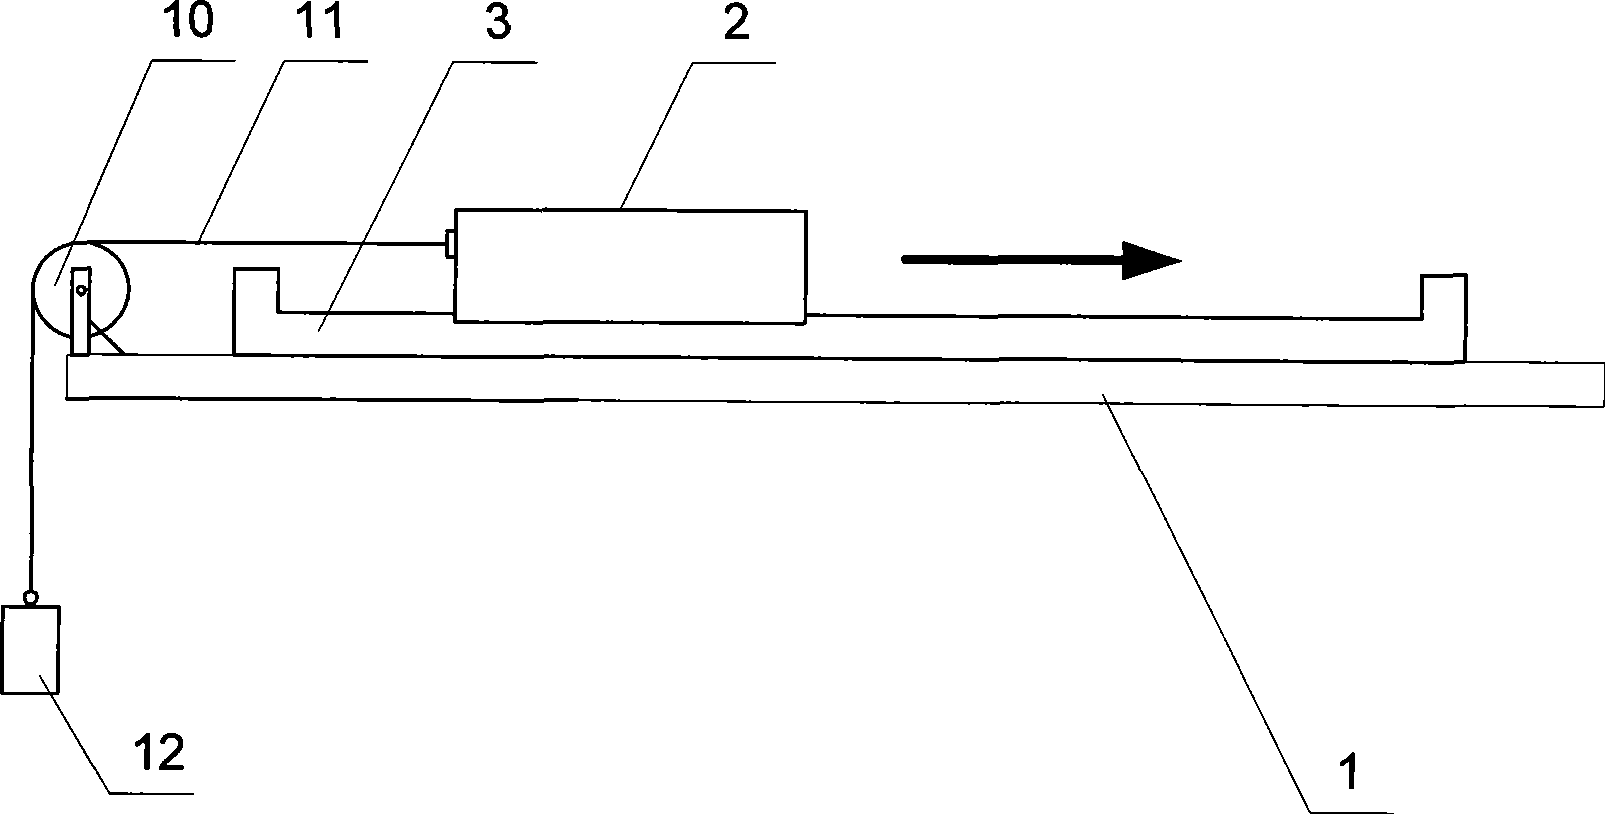 Device for testing constant thrust load of continuous linear motor